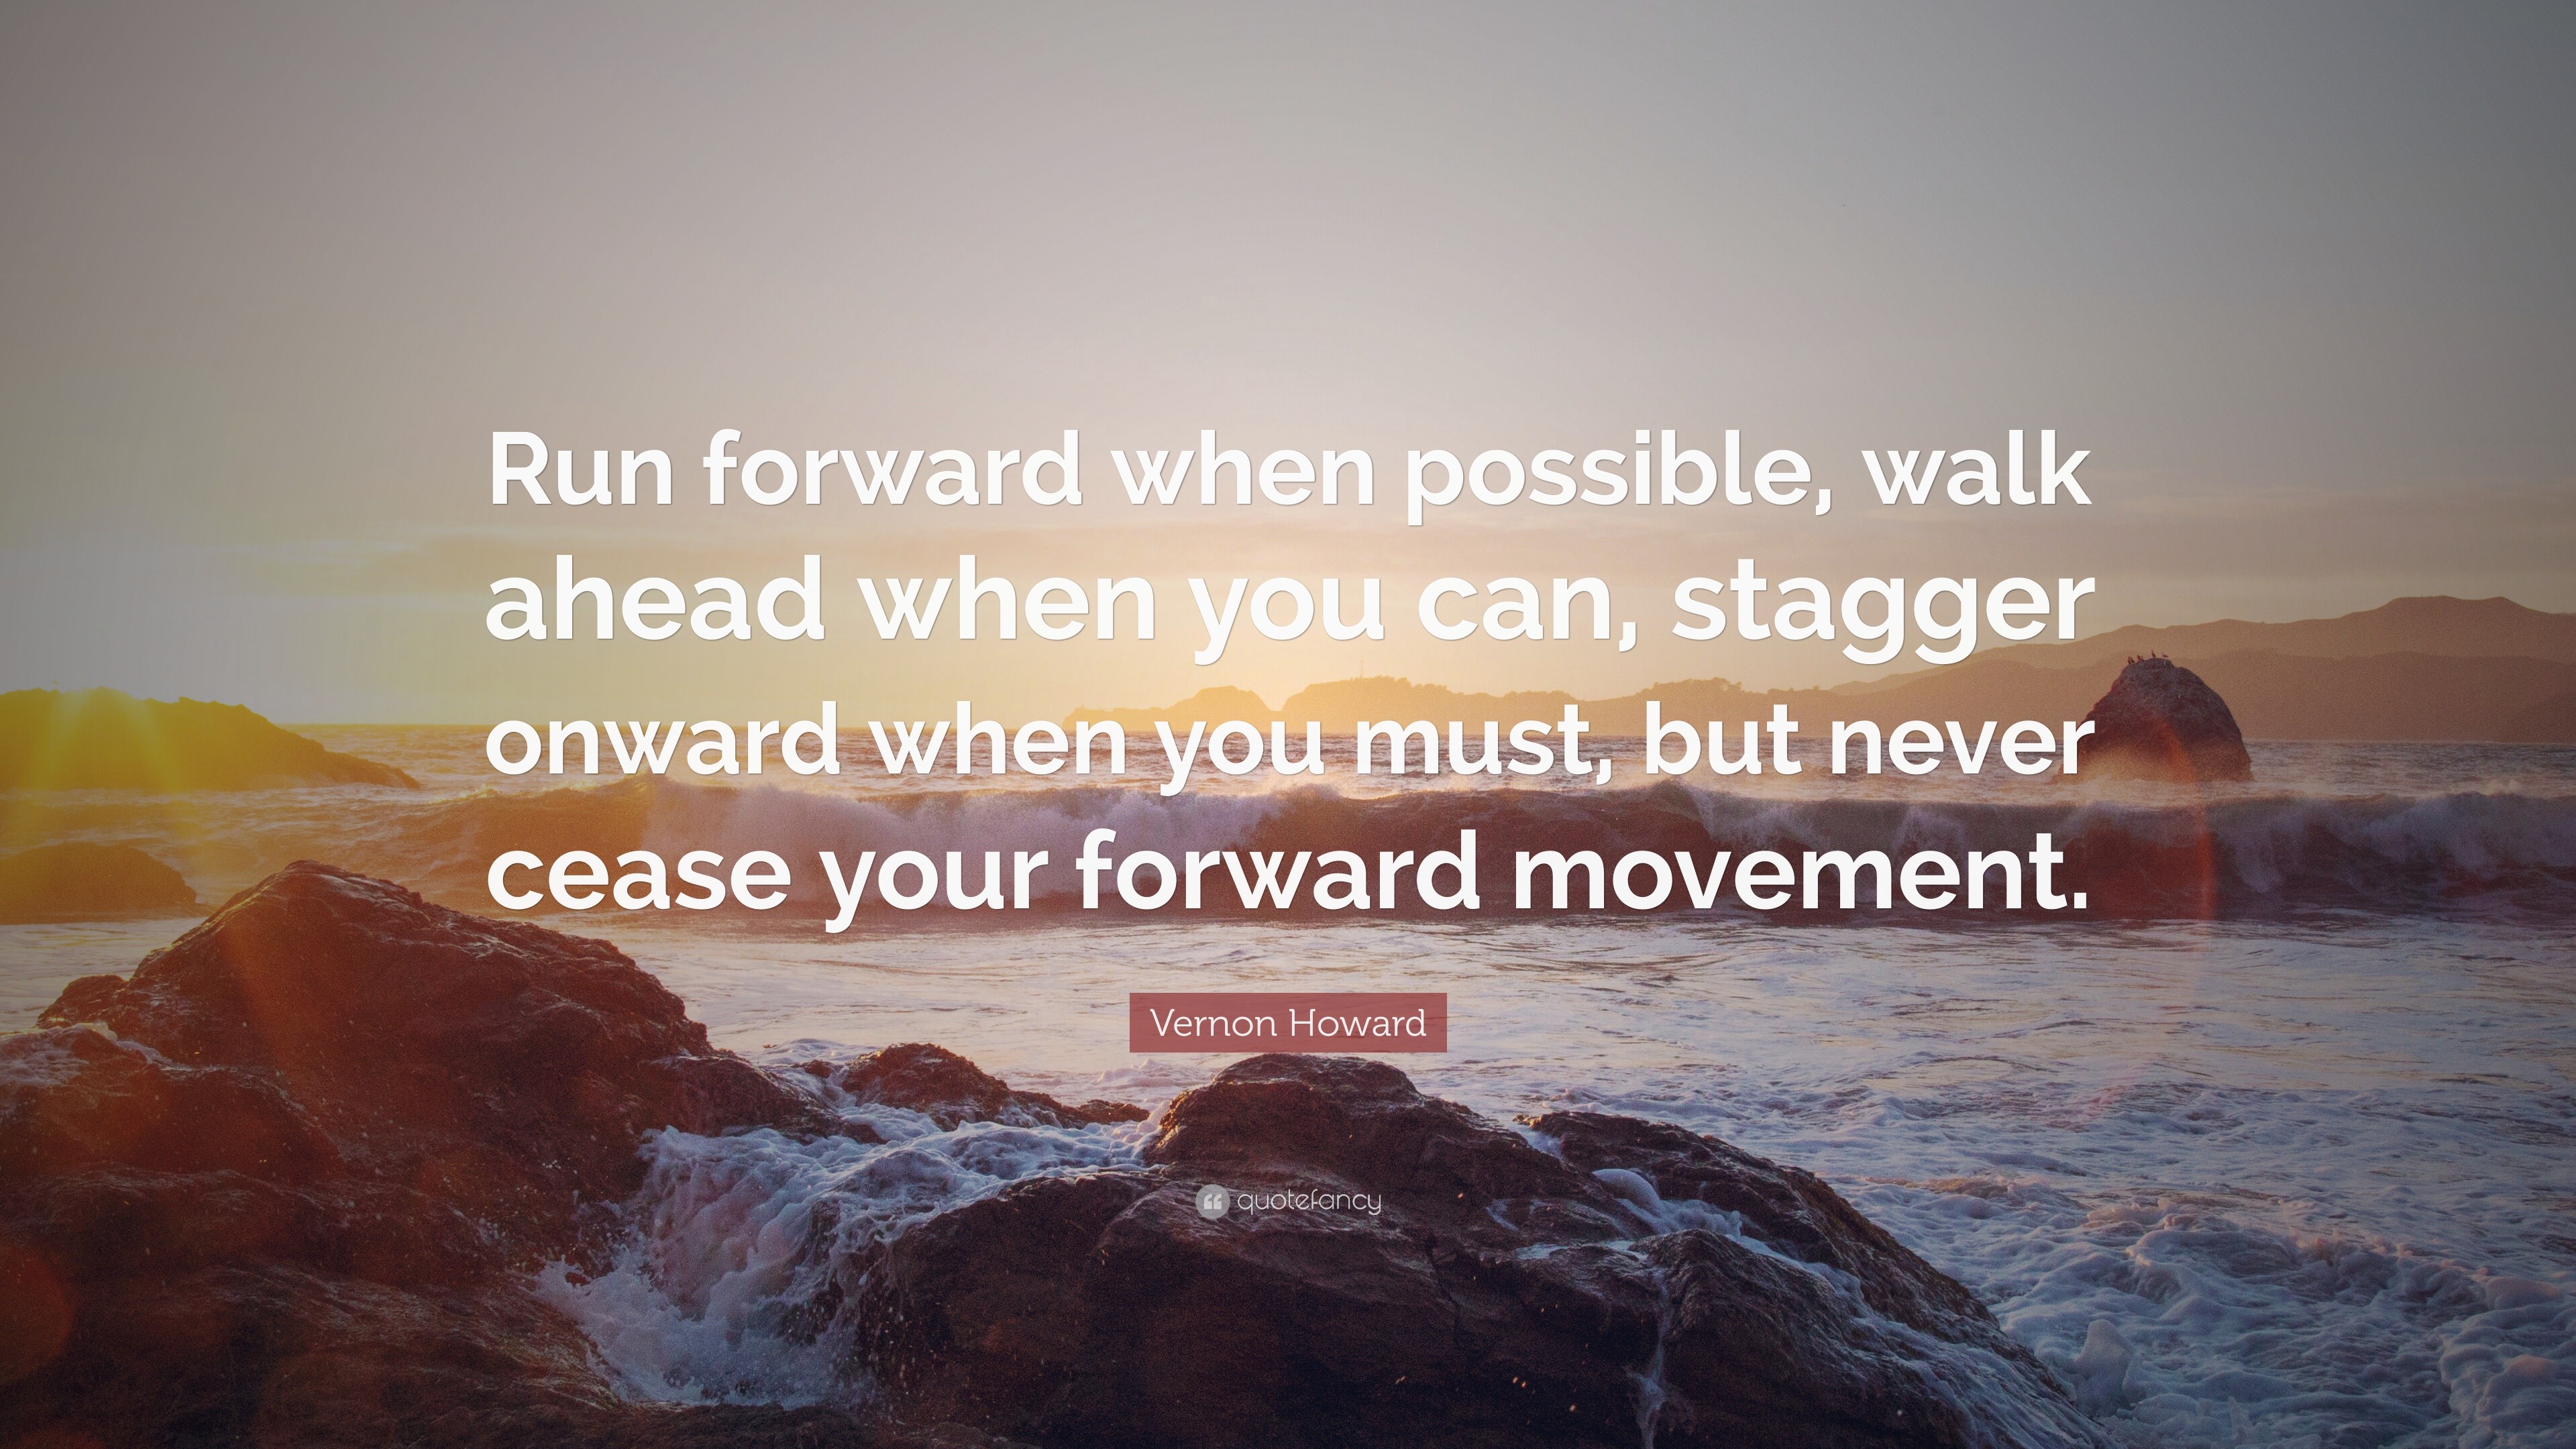 Vernon Howard Quote: “Run forward when possible, walk ahead when you ...